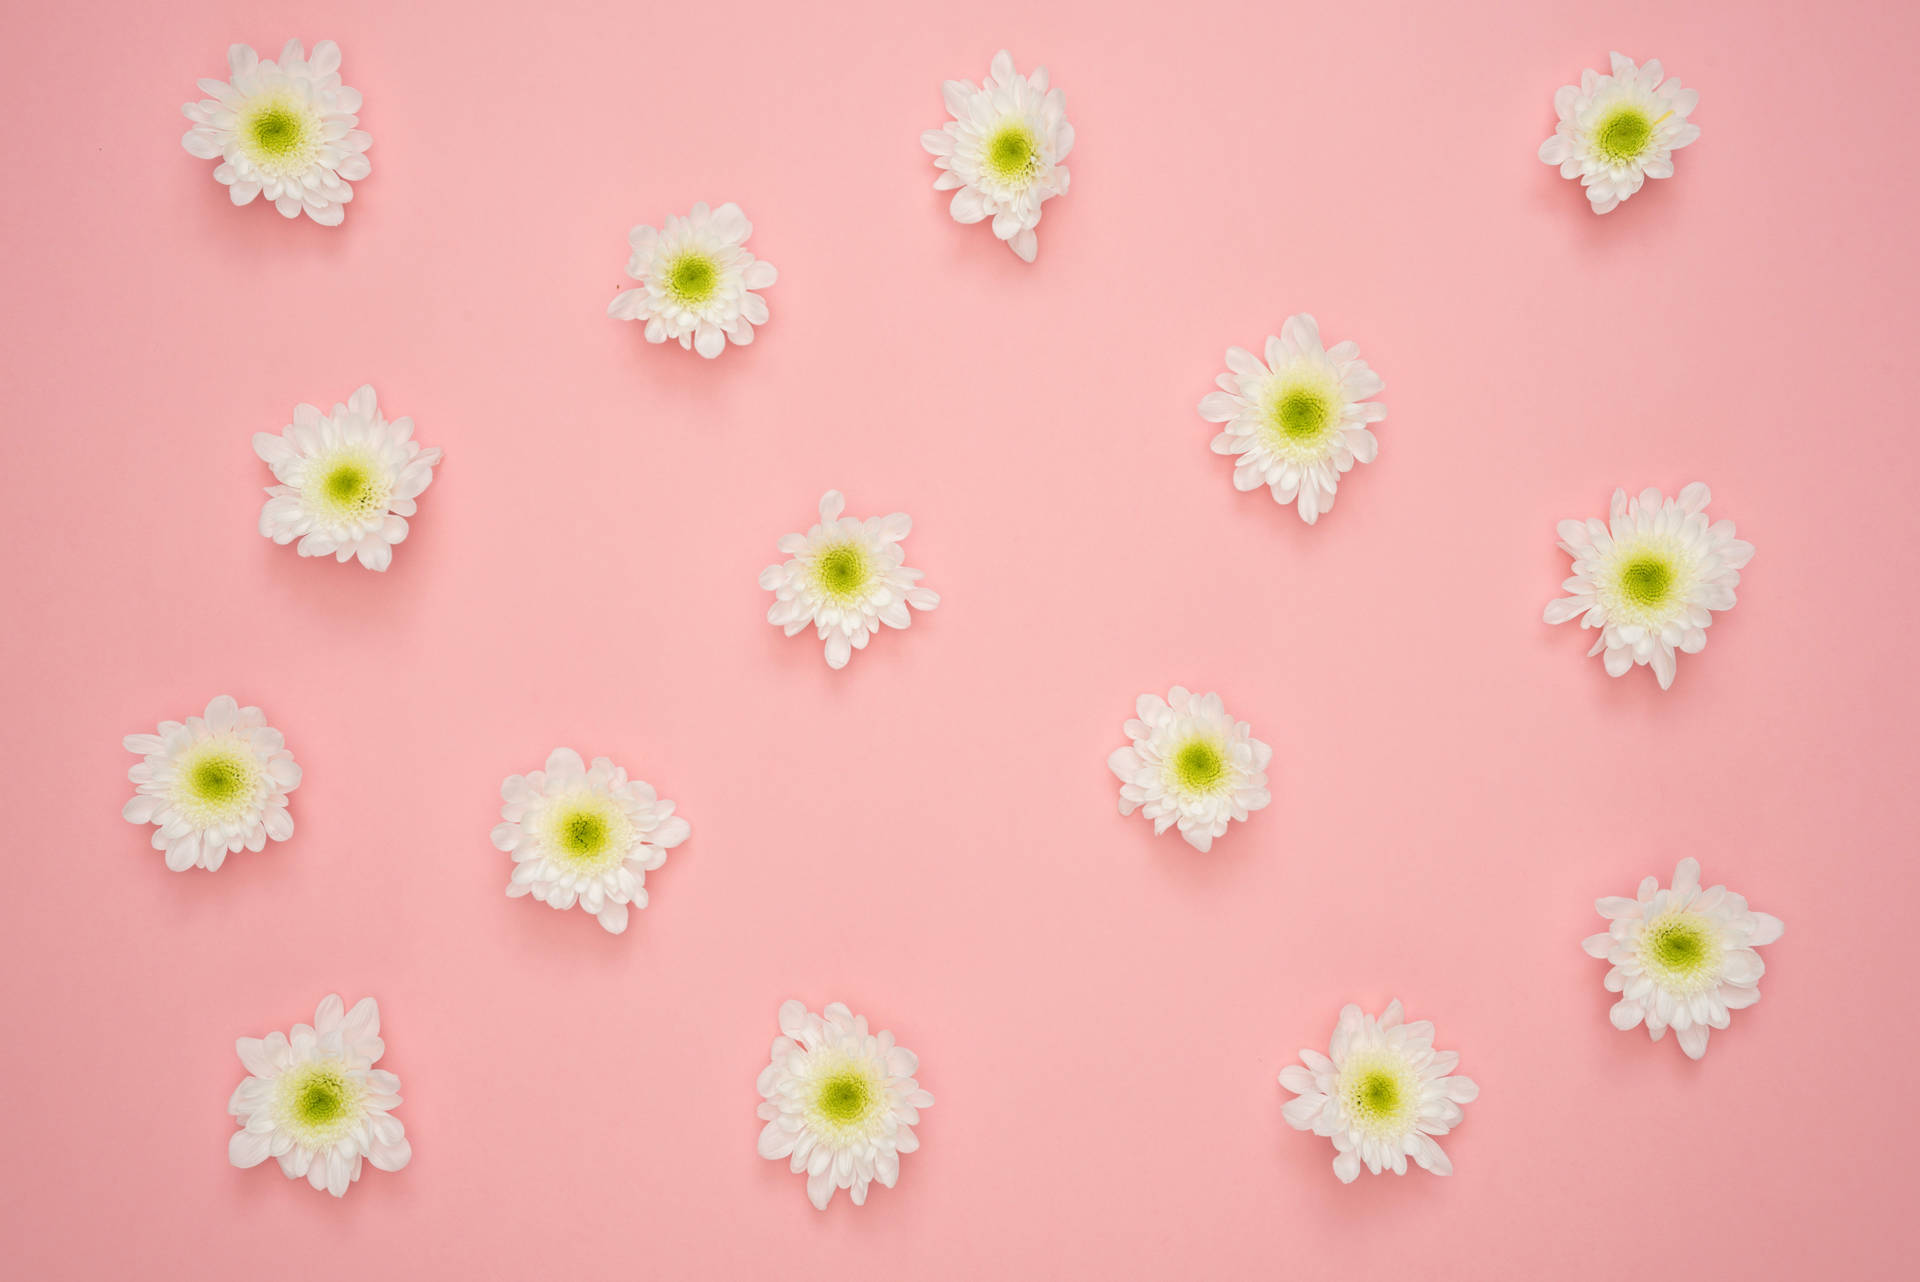 White Flowers On Pink Background Background